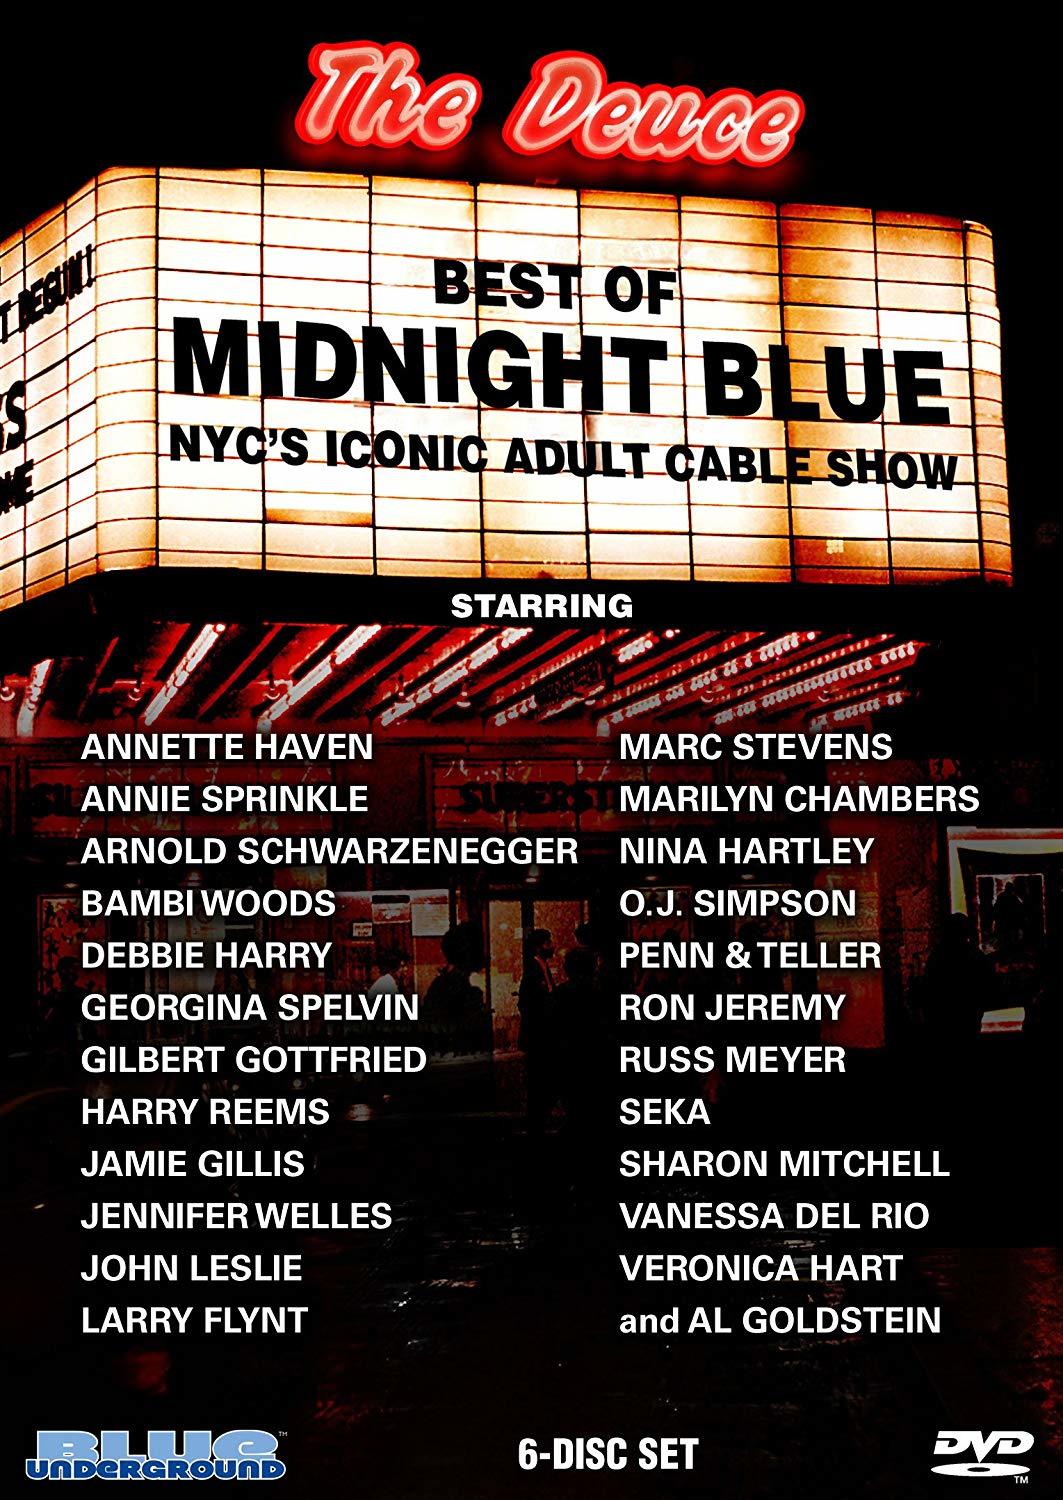 Annette Haven Vintage - Best of Midnight Blue: NYC's Iconic Adult Cable Show DVD